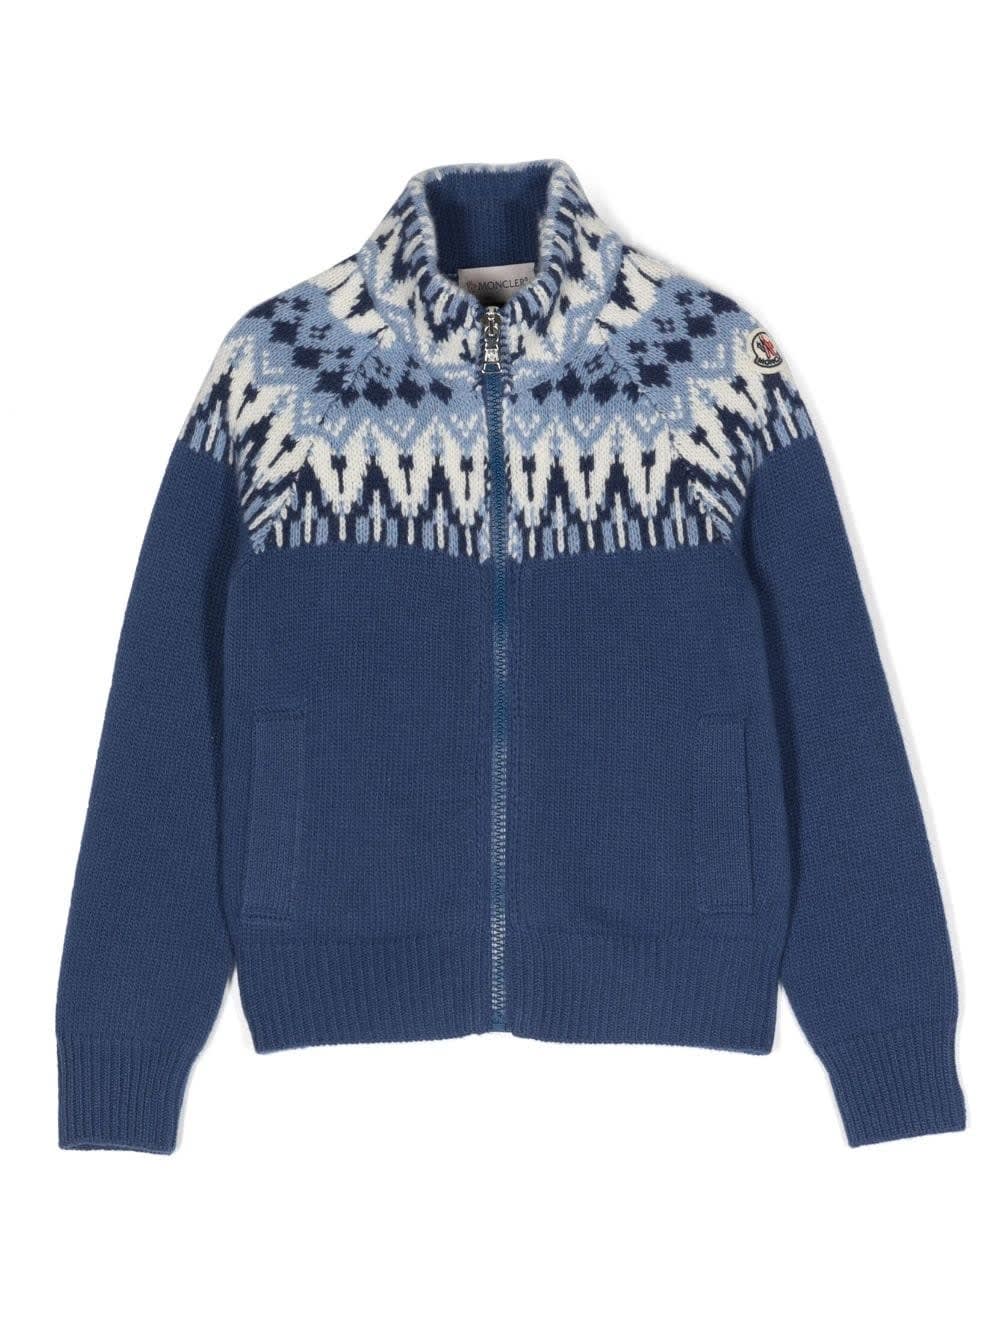 Moncler Kids' Blue Zipped Cardigan With Nordic Pattern